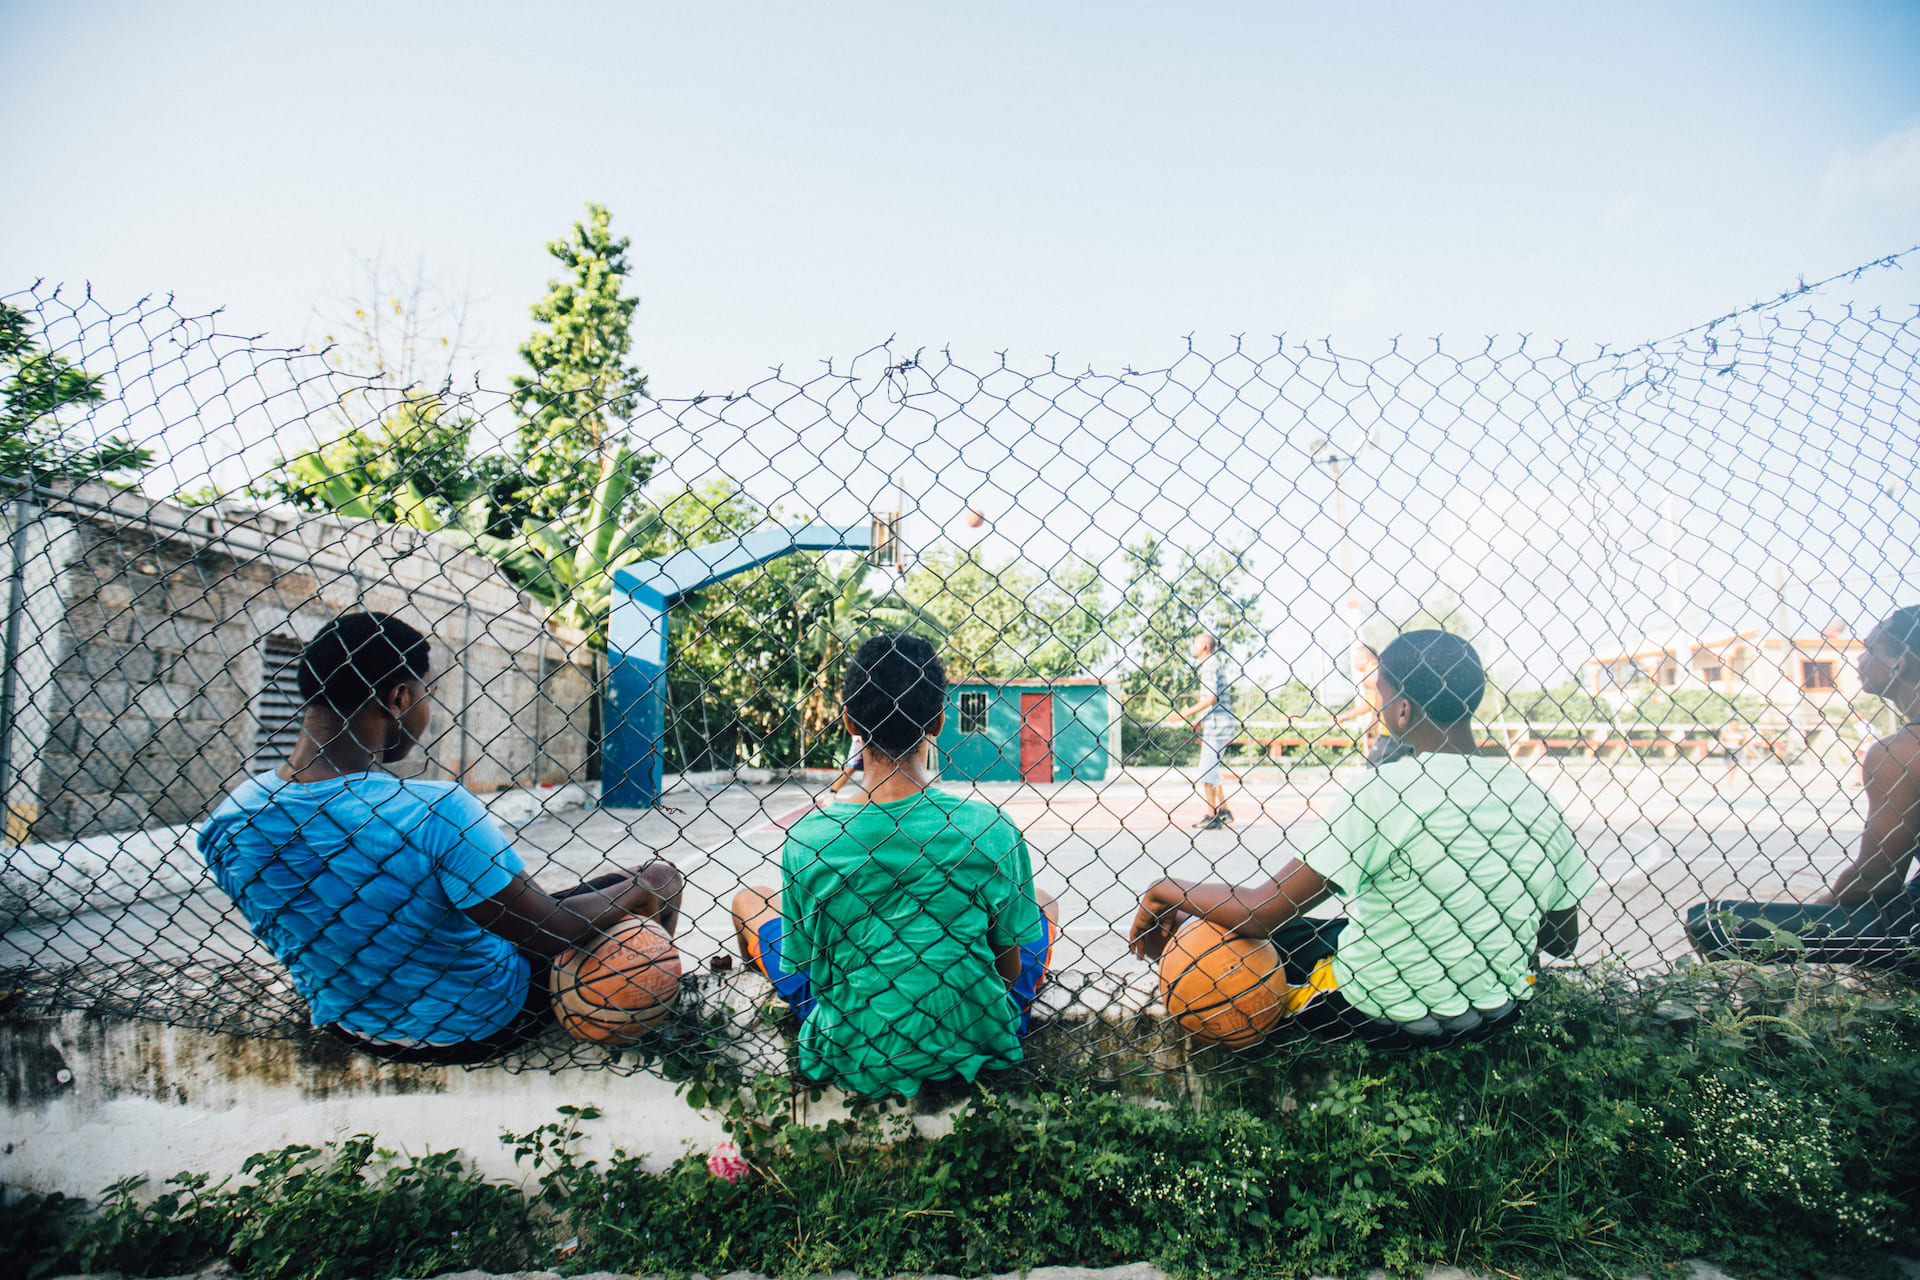 Three boys sit on the ground with their backs to the camera, leaning against a chain link fence. They are looking at a basketball court, holding basketballs.